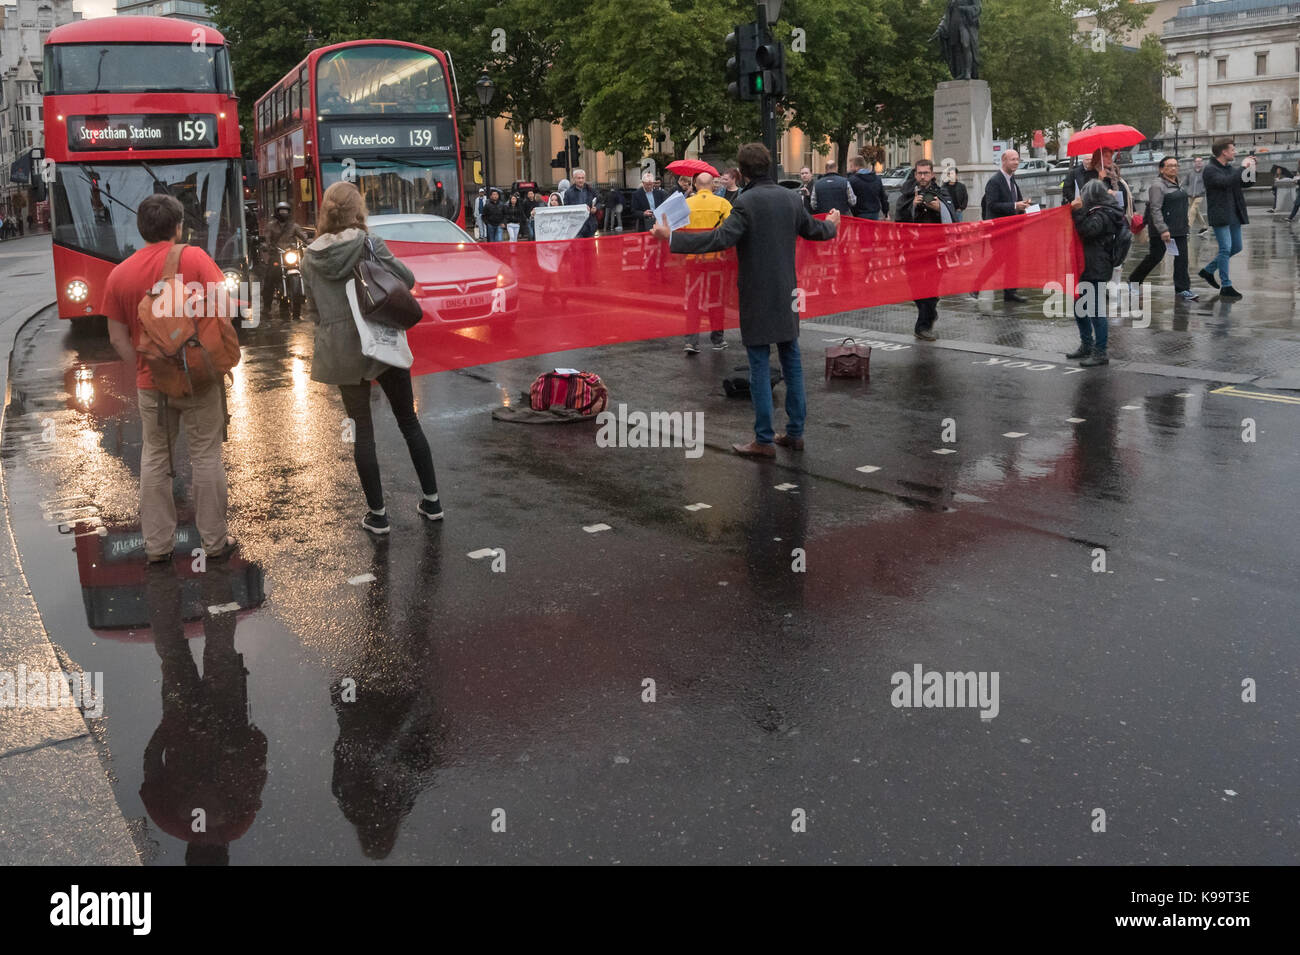 September 21, 2017 - London, UK - London, UK. 21st September 2017. Campaigners for 'Stop Killing Londoners' hold a banner across Pall Mall to clear Trafalgar Square of traffic in a short protest against the illegal levels of air pollution in the capital which result in 9,500 premature deaths and much suffering from respiratory disease. In a carefully planned protest they blocked all five entrances to the roundabout at the square, emptying it of traffic while they spoke about the problem and handed out leaflets. This was the 5th protest by campaigners from Rising Up aimed at mobilising people a Stock Photo